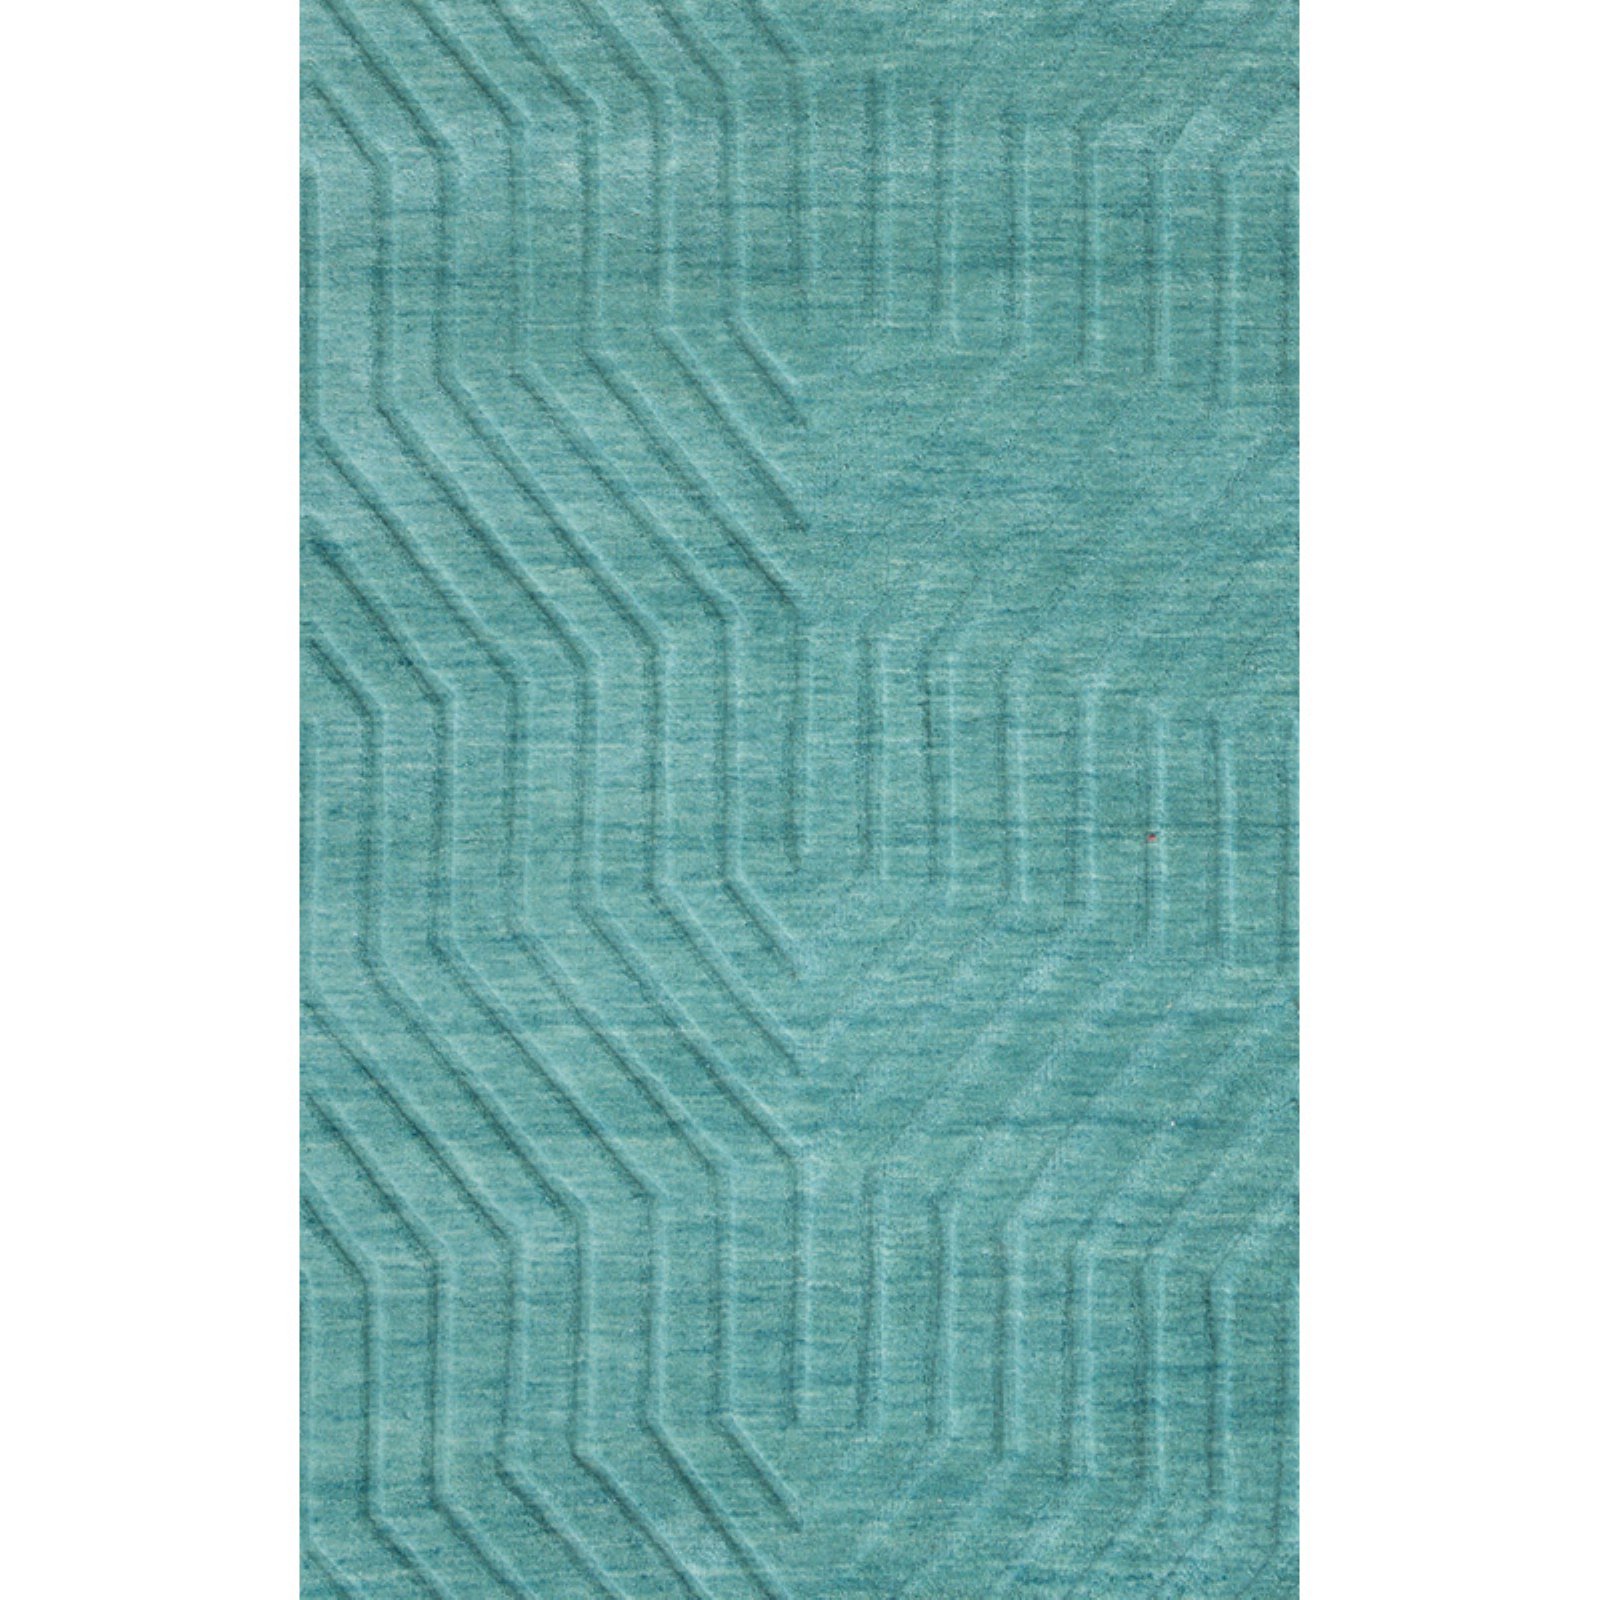 Technique 8' x 10' Solid Blue/Dark Teal Hand Loomed Area Rug - image 3 of 4